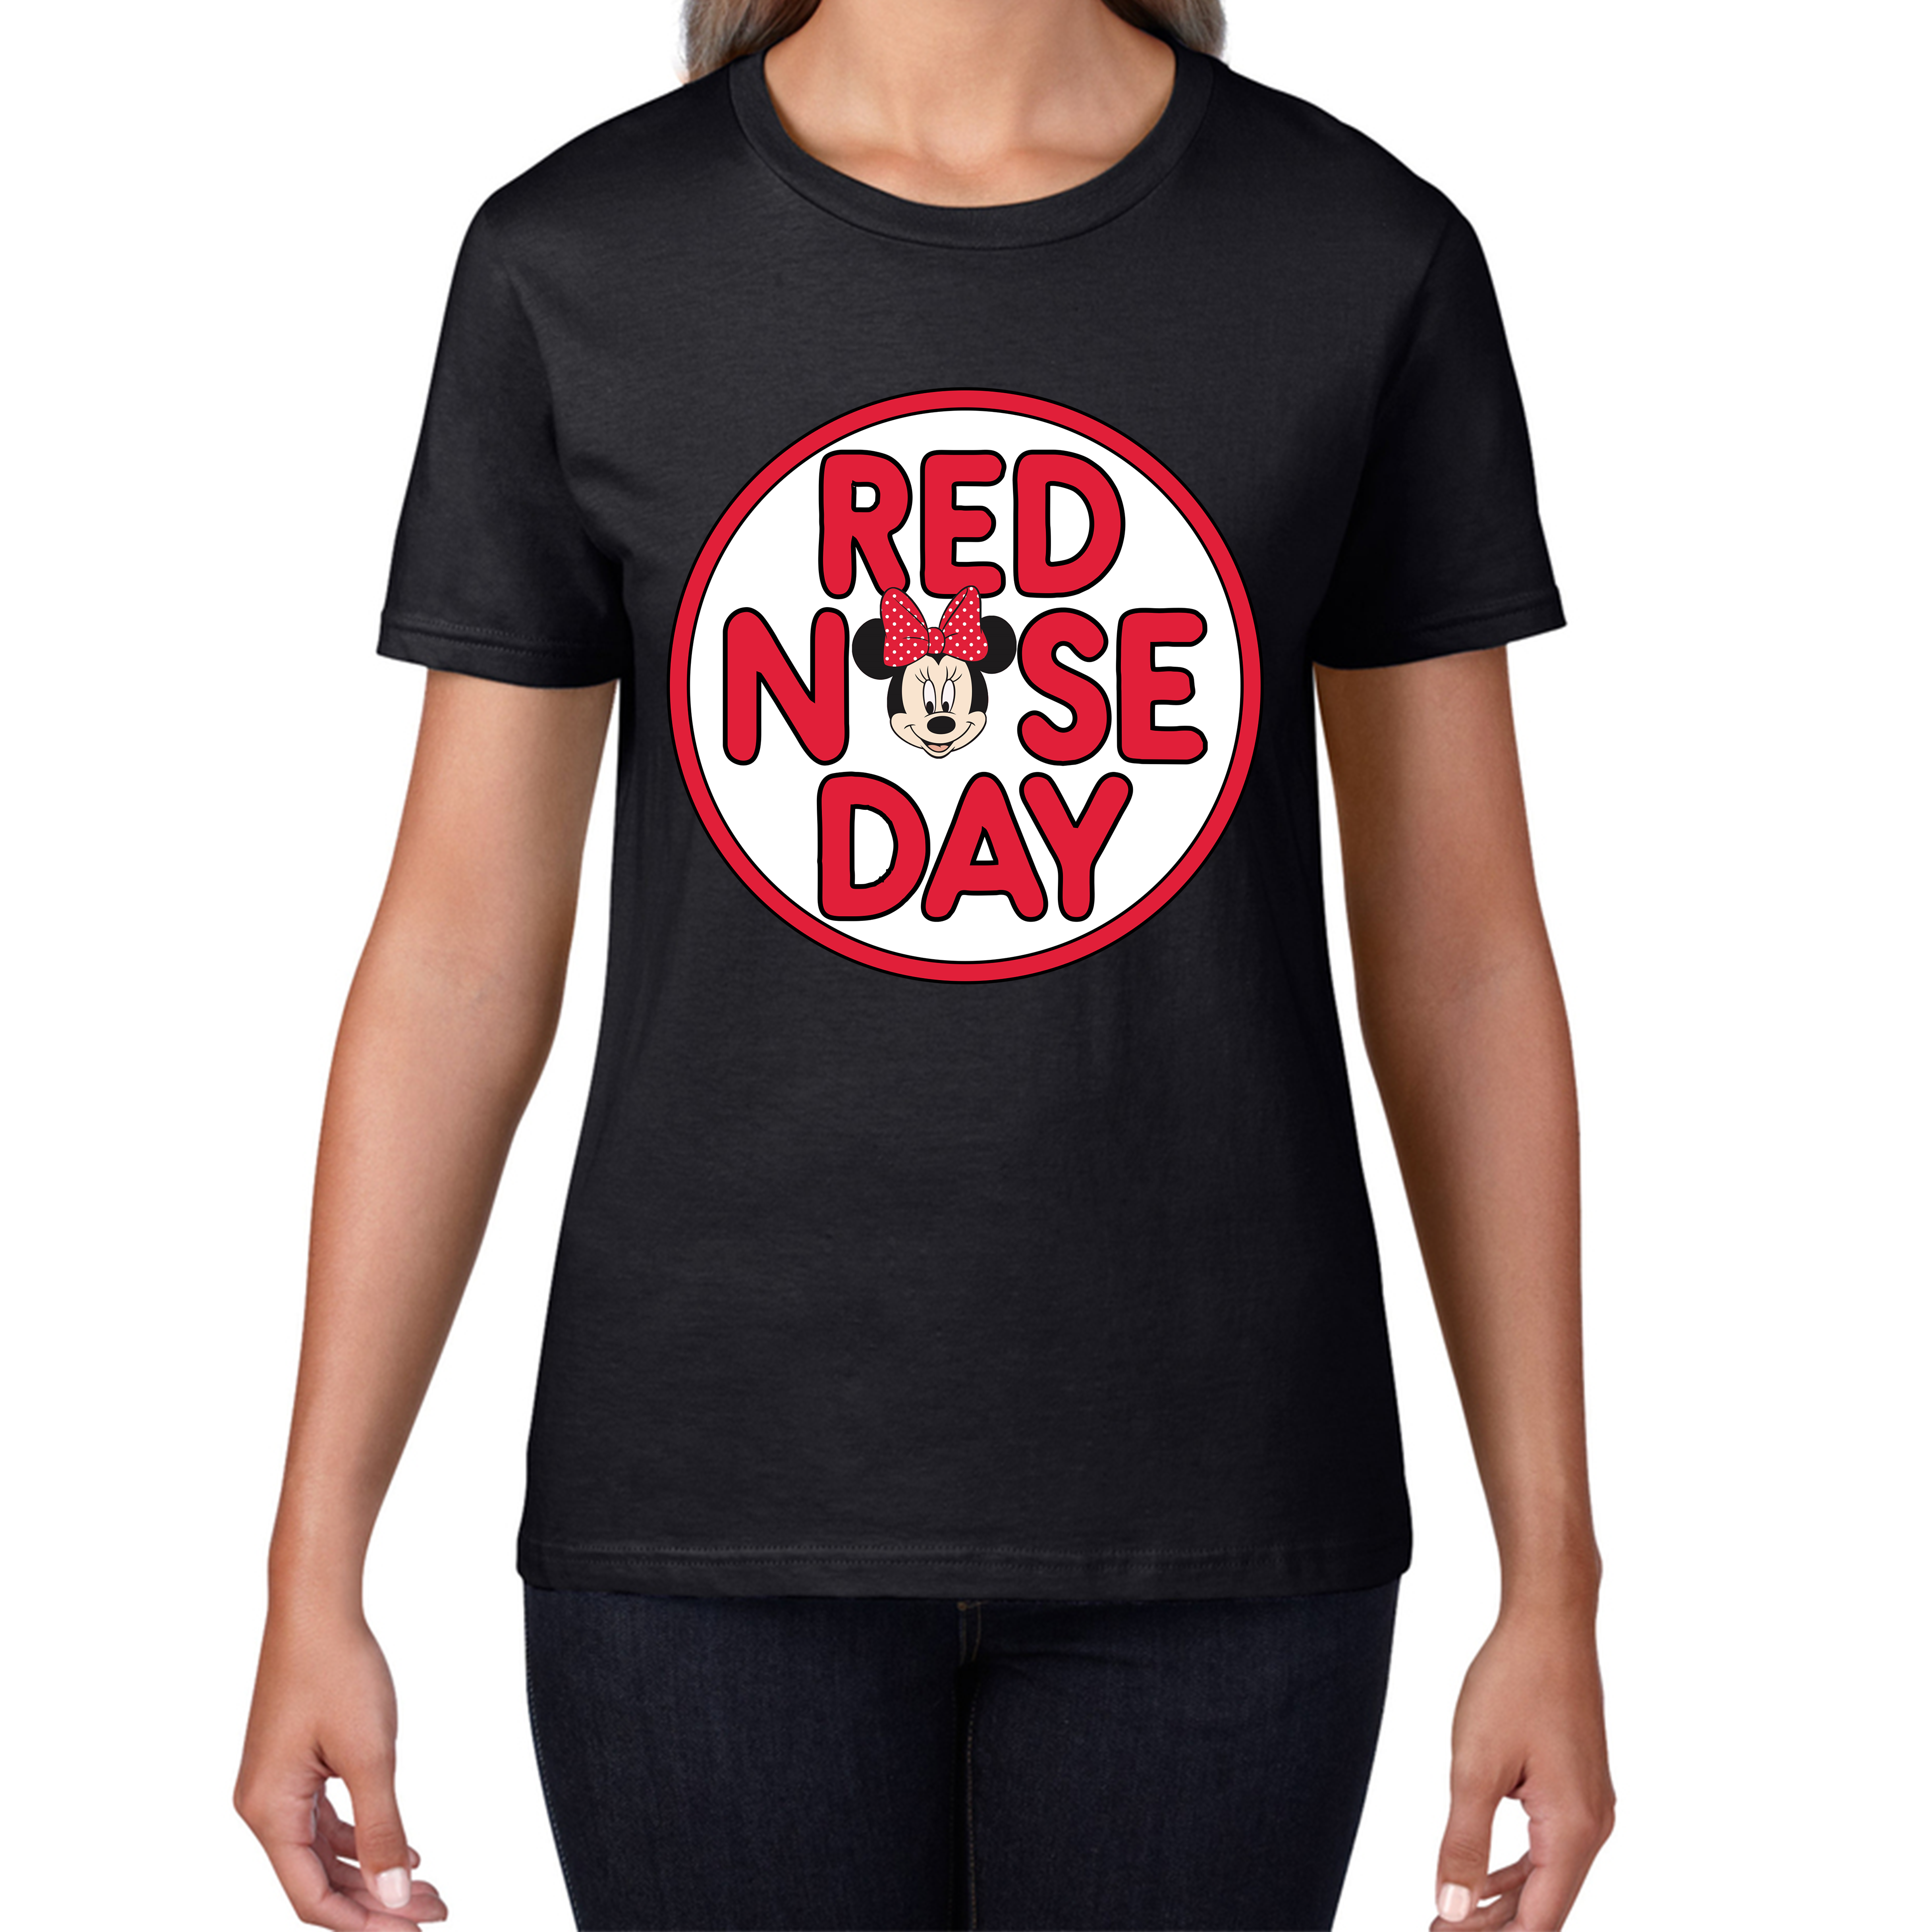 Disney Minnie Mouse Red Nose Day Ladies T Shirt. 50% Goes To Charity